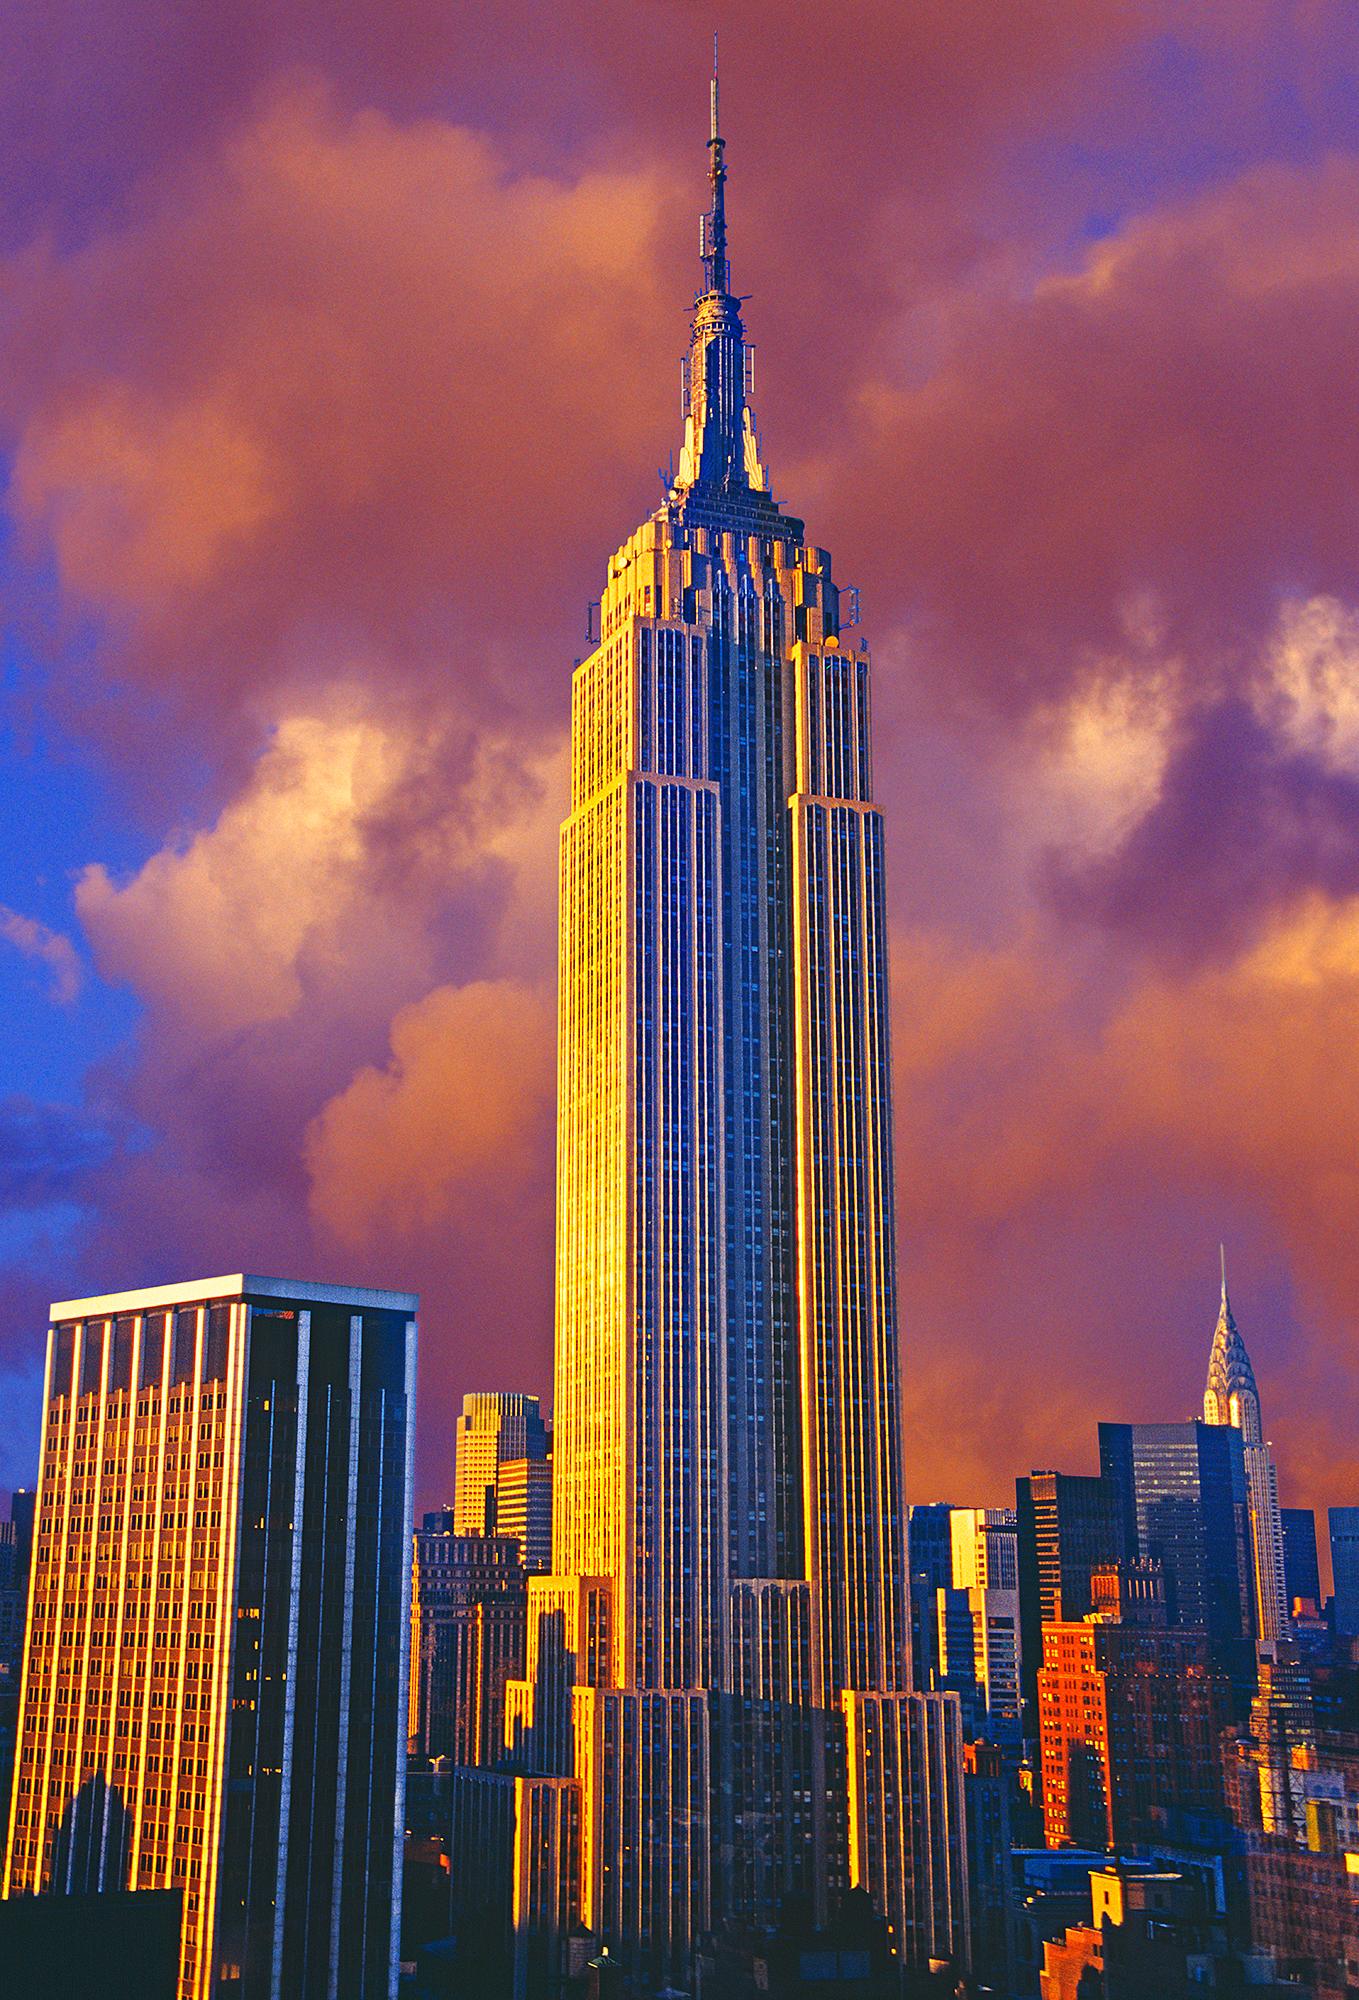 Landscape Photograph Mitchell Funk - Golden Empire State Building, New York City